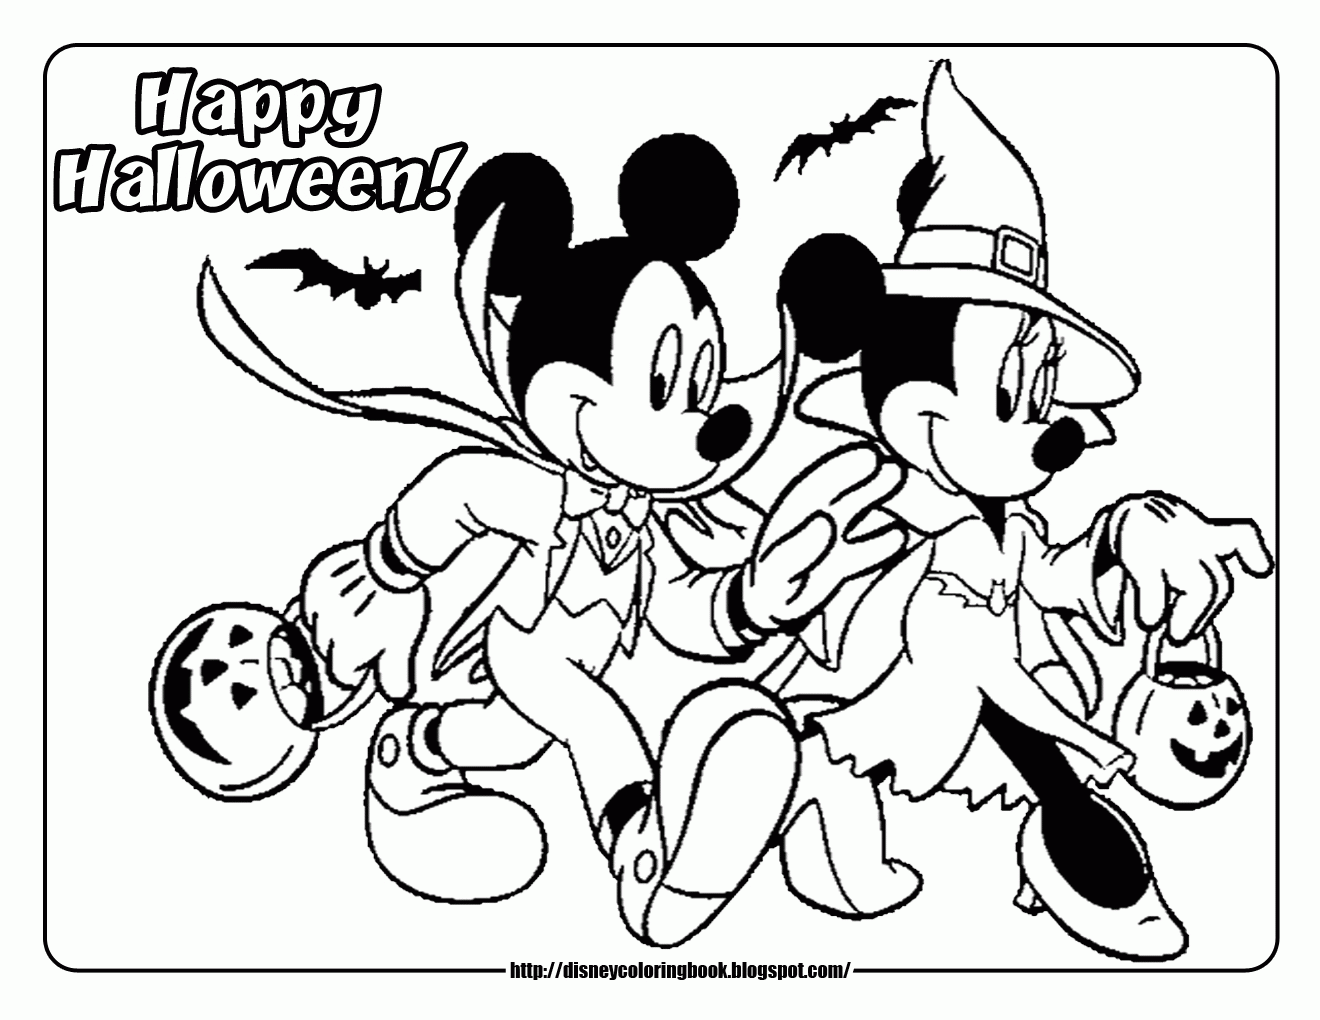 halloween-disney-colouring-pages-clip-art-library